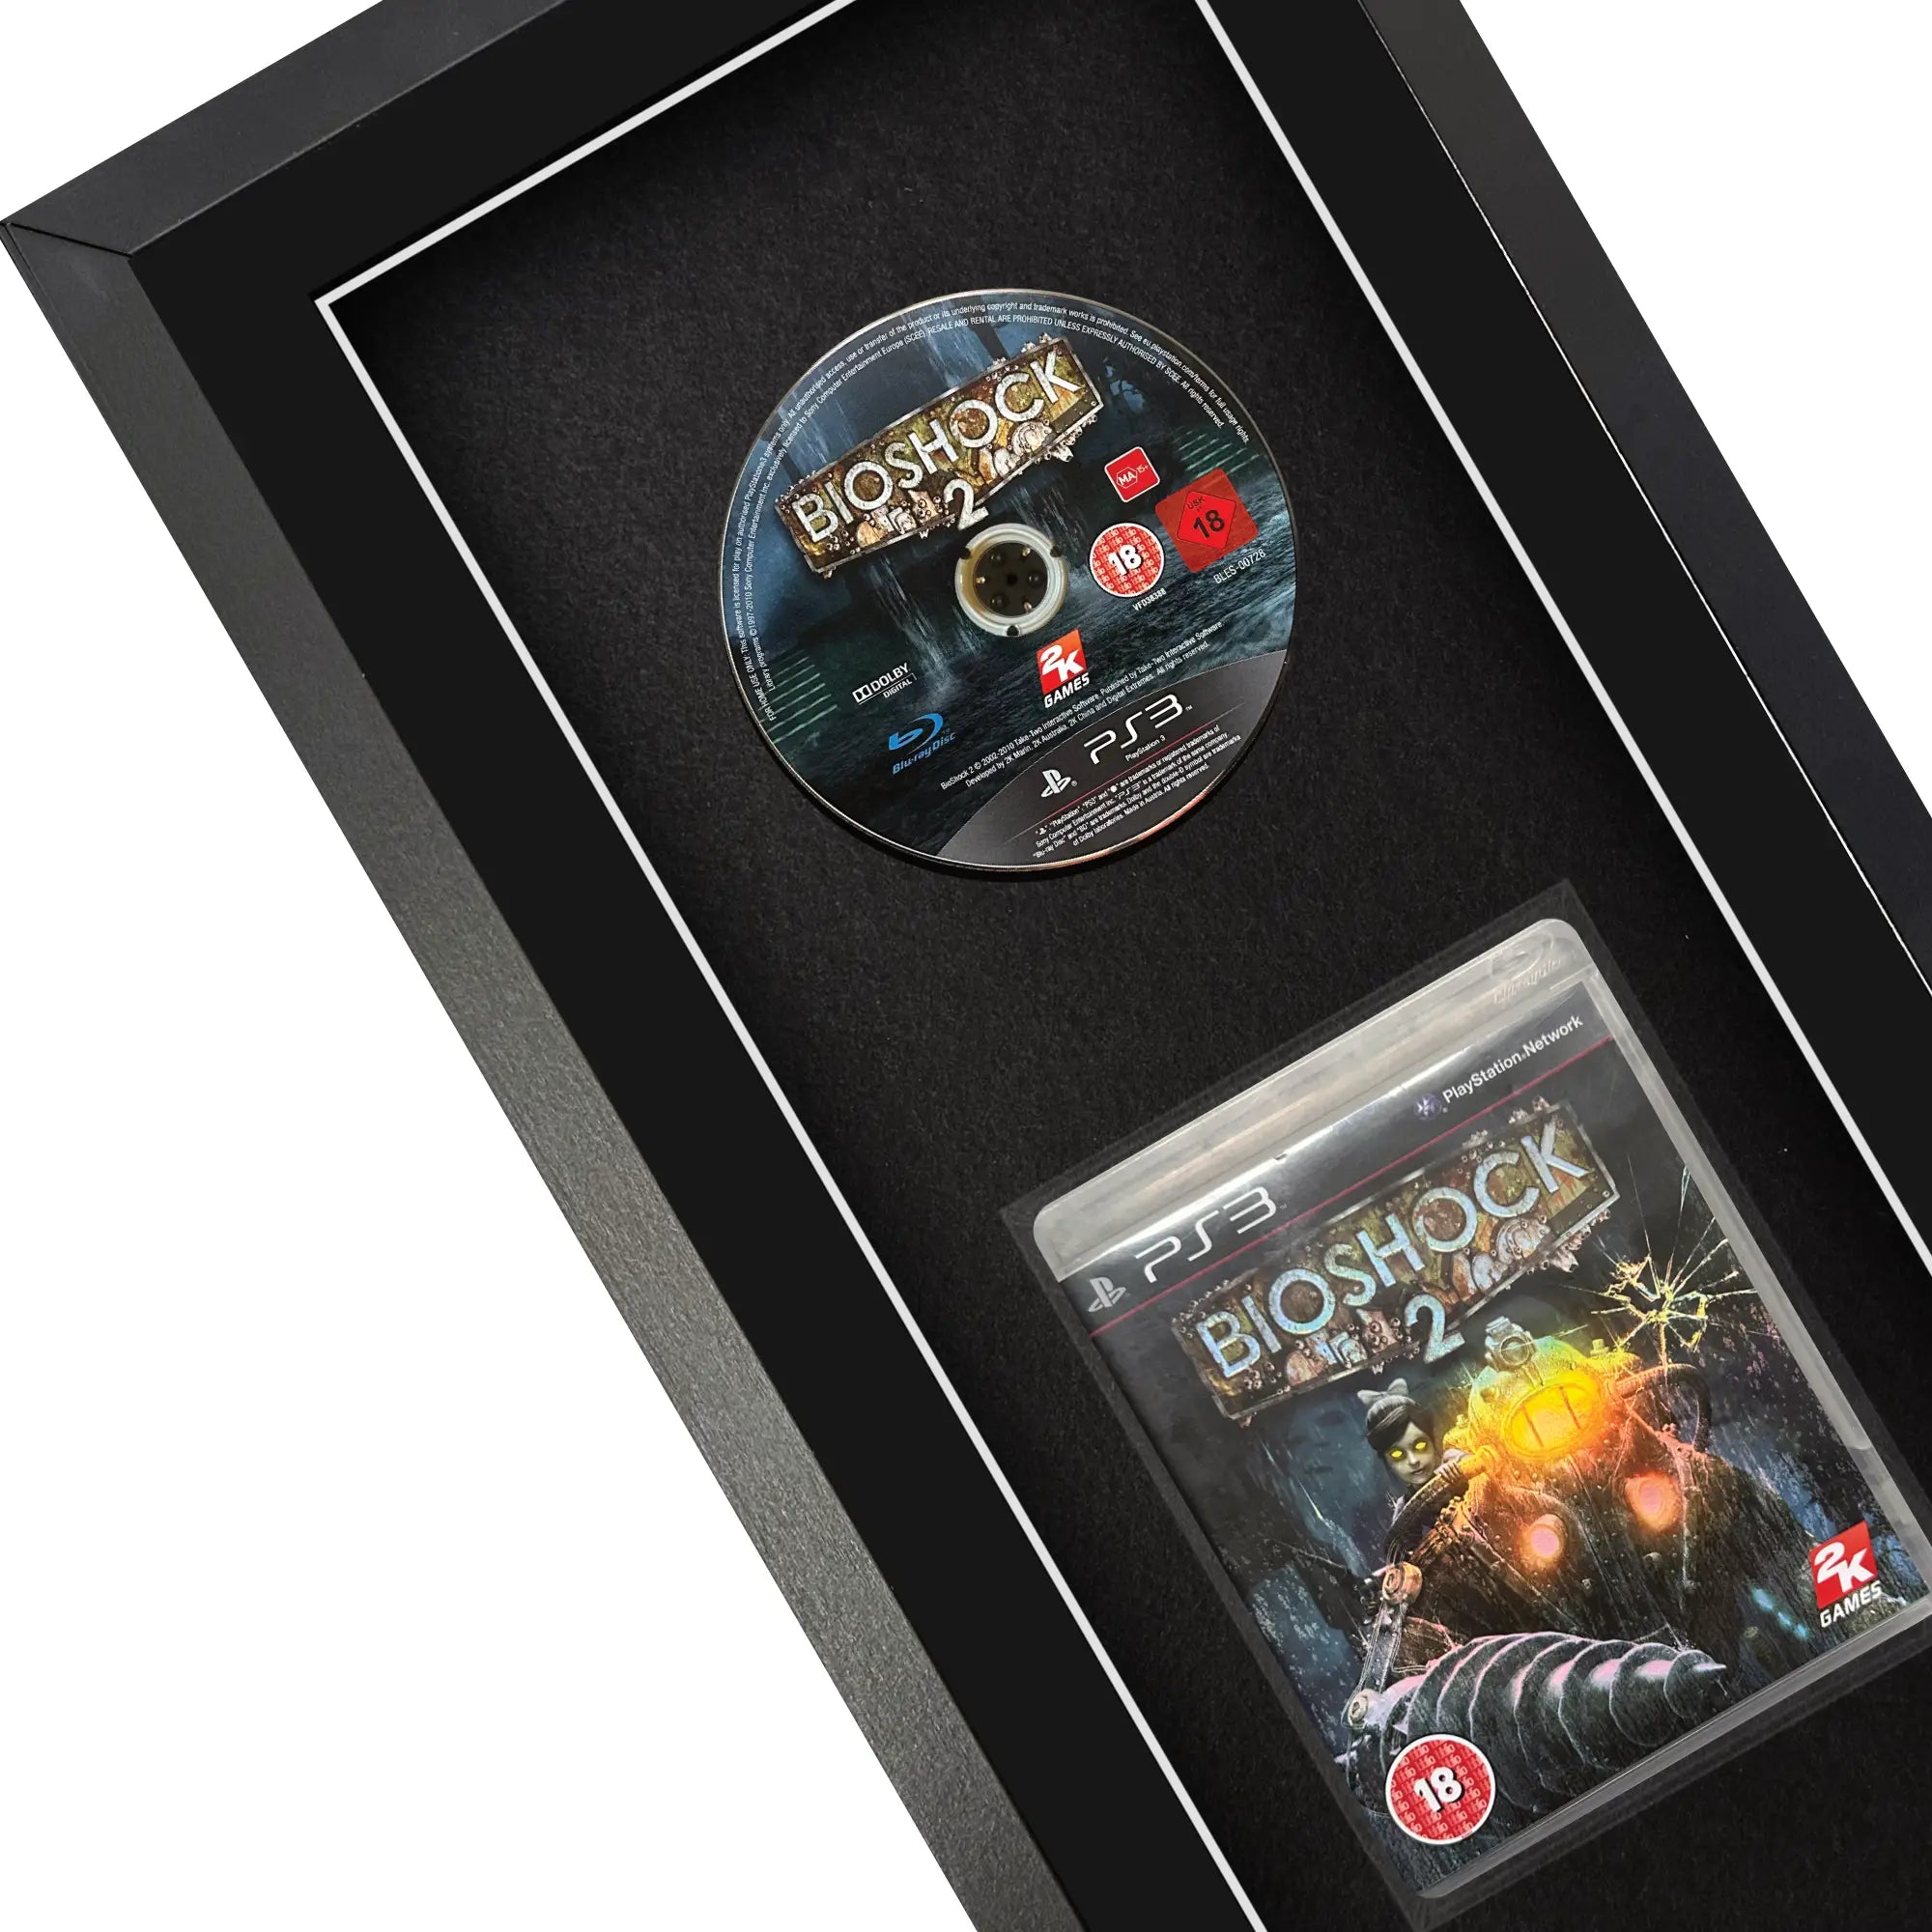 Frame your own PlayStation 3 game to be displayed within a frame, the perfect way to showcase your game